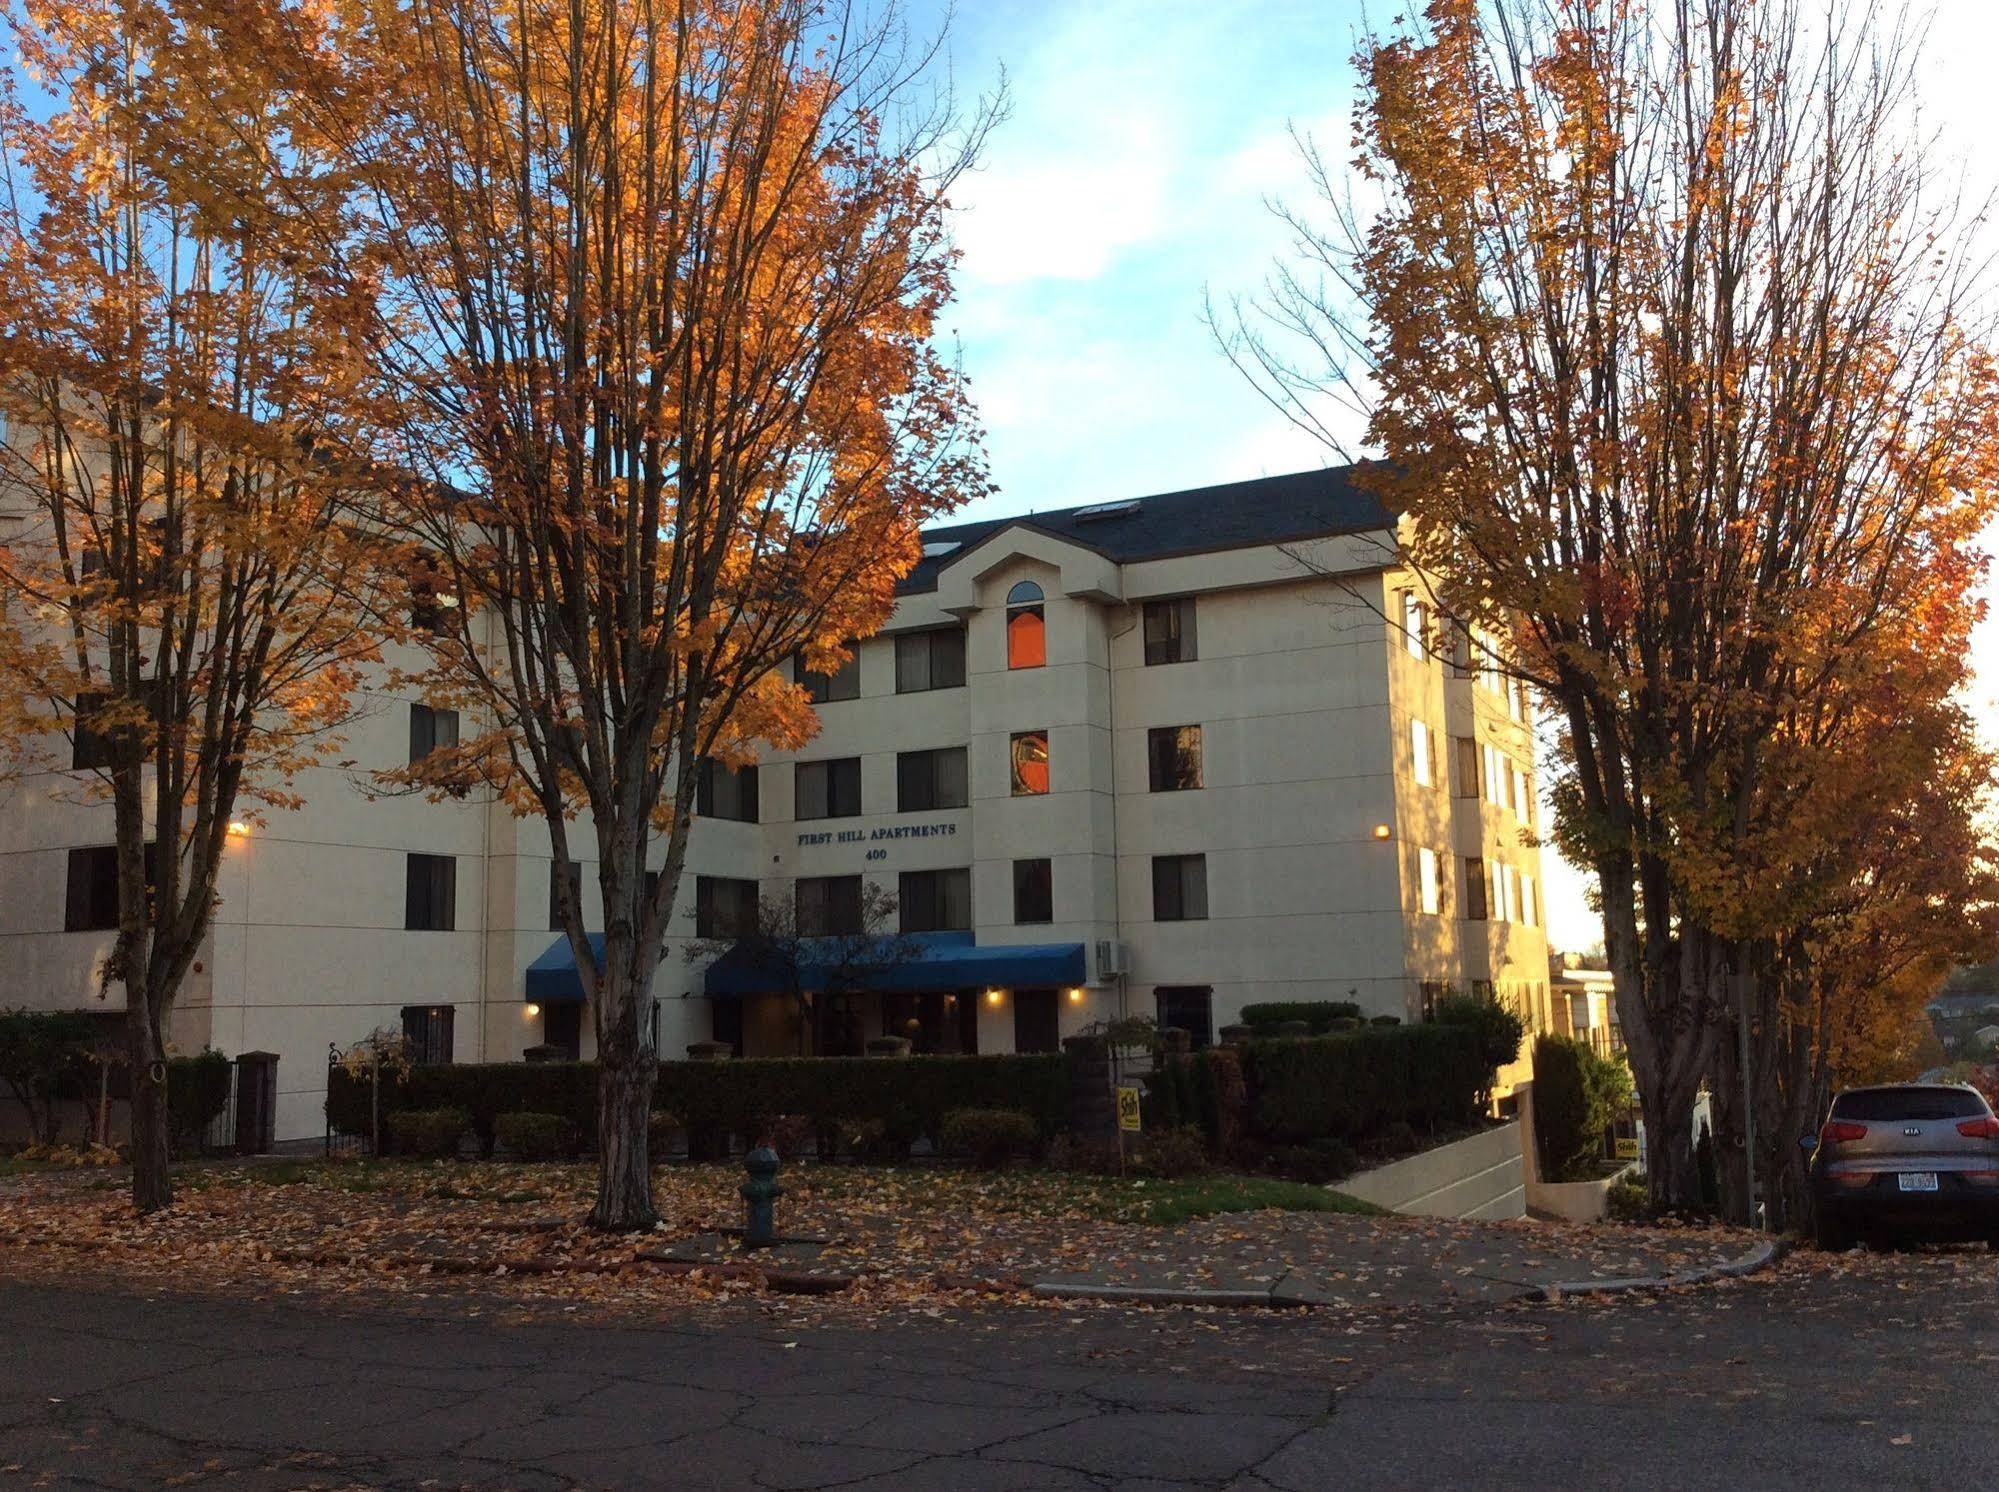 First Hill Apartments Extended Stay Seattle